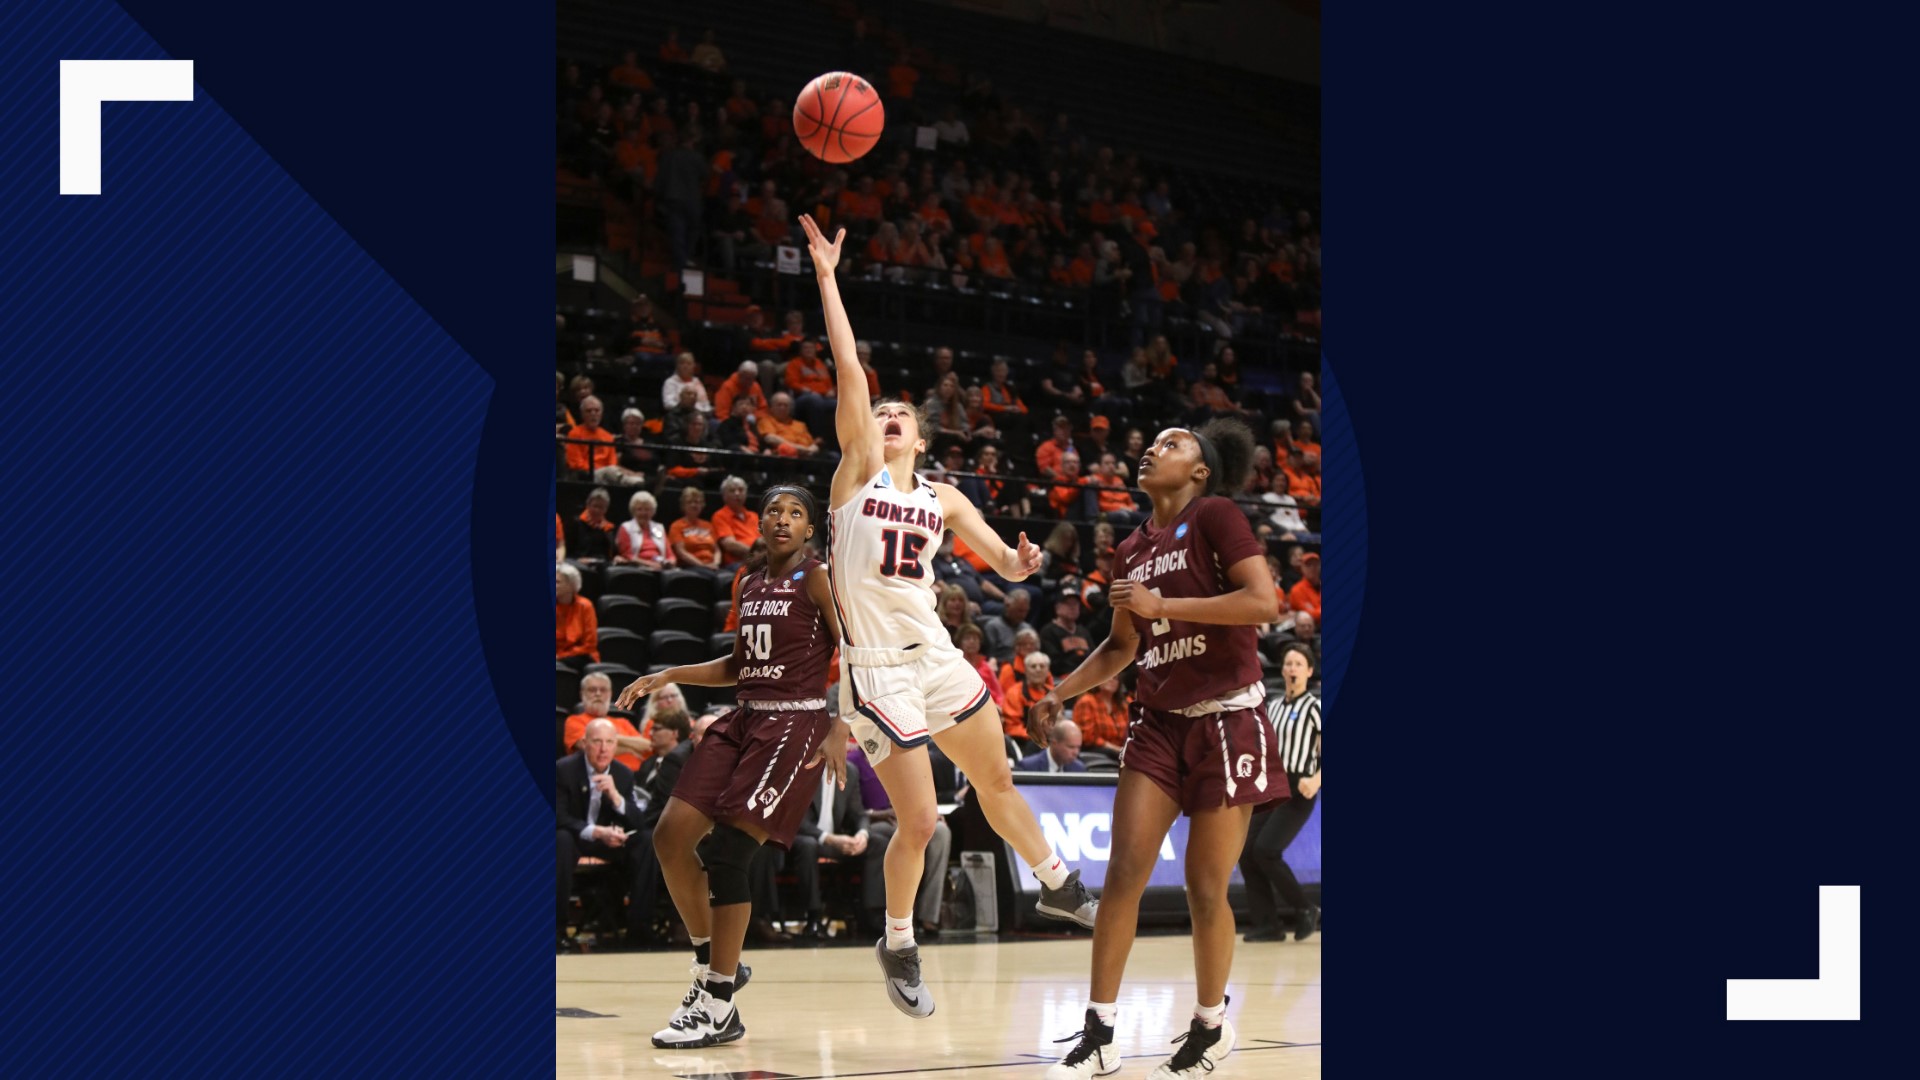 "We can't control what happened, and that's the hardest part," she said about her playing days at Gonzaga coming to an end after the NCAA Tournament was canceled.